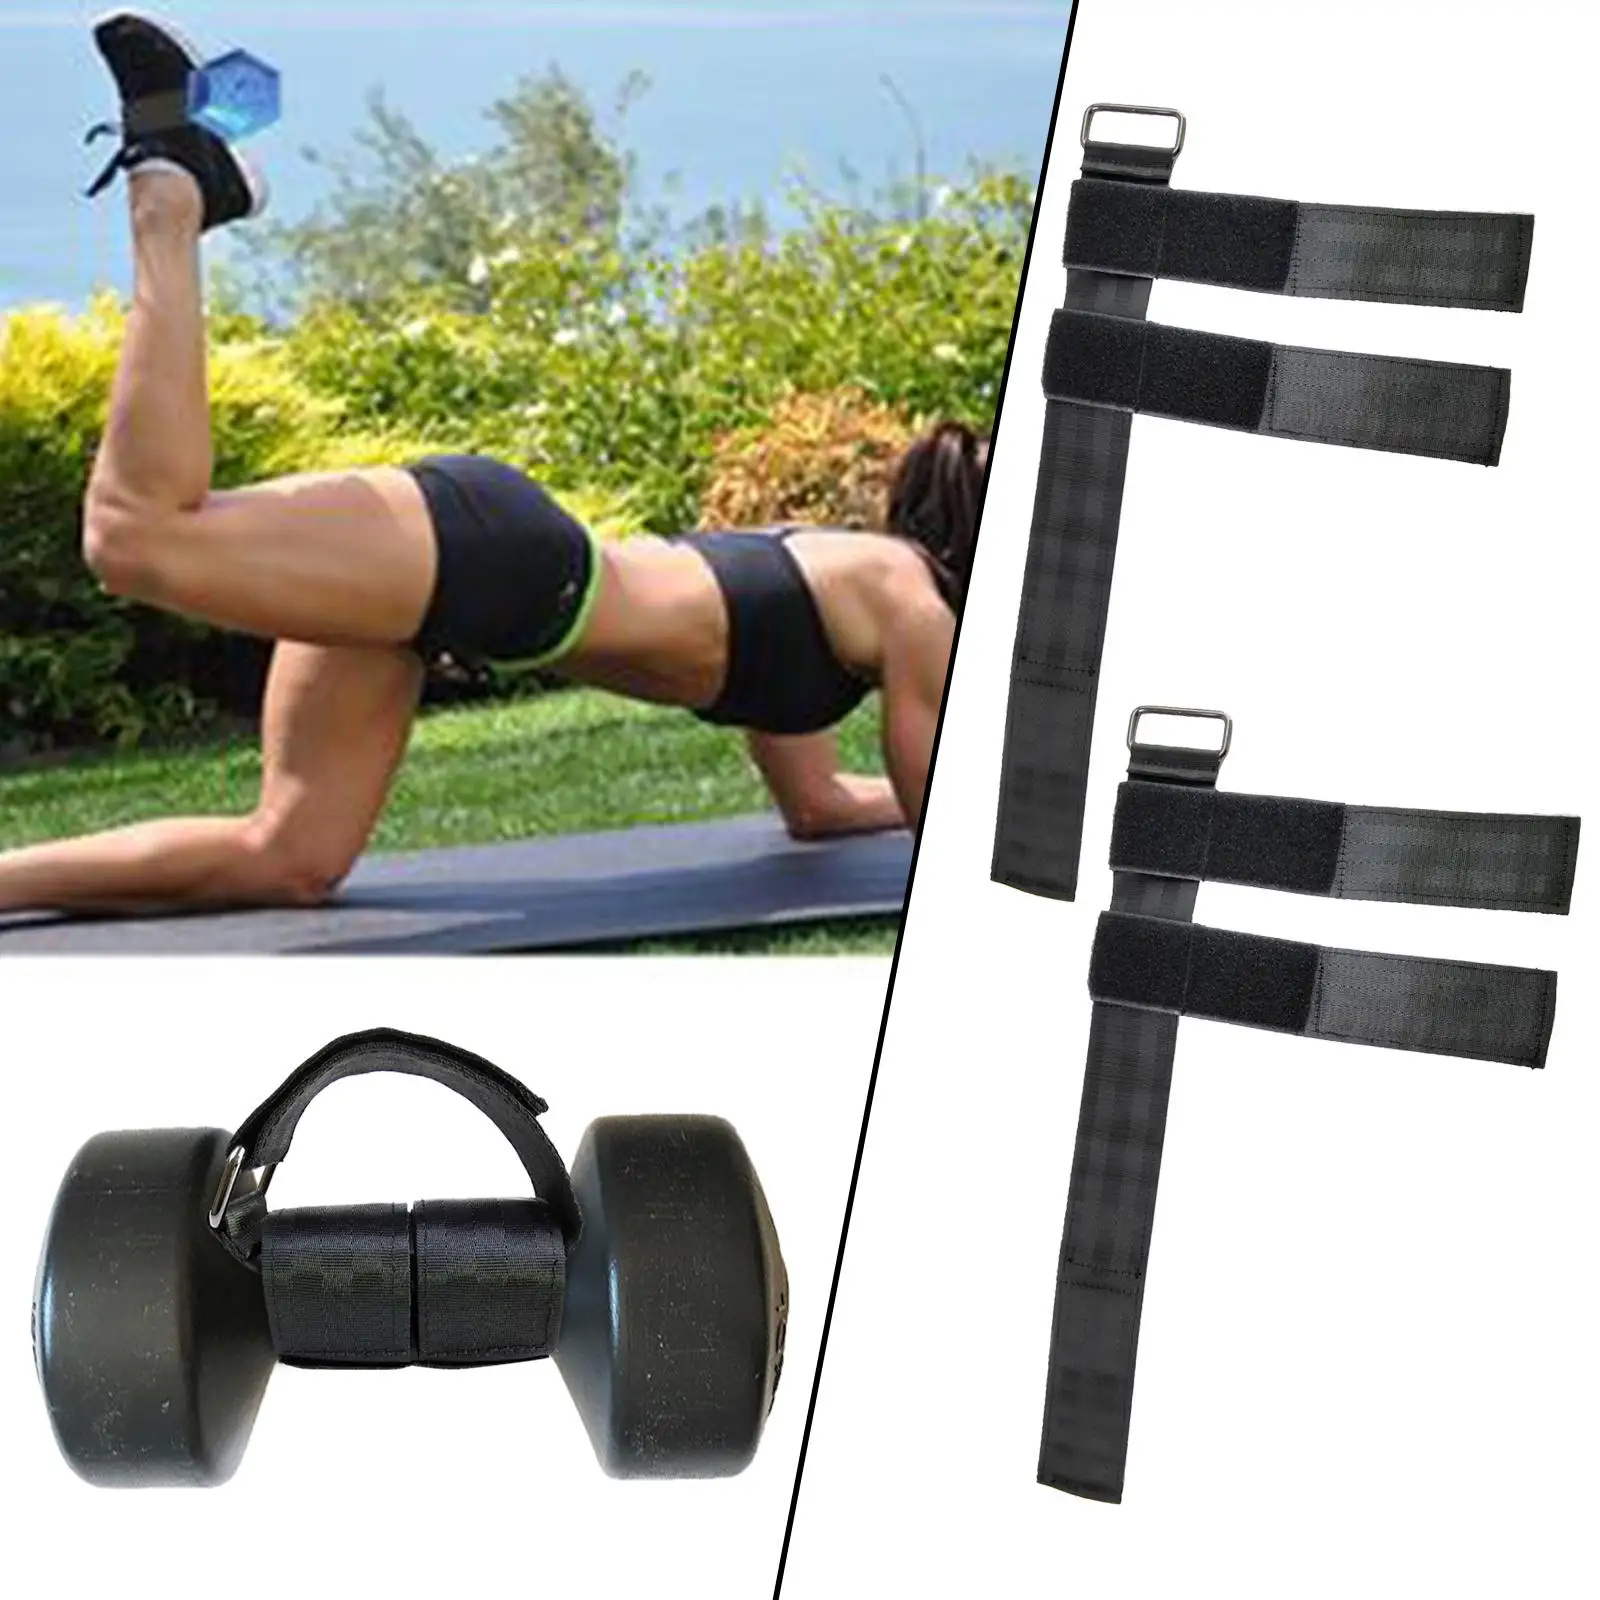 2x D Ring Ankle Dumbbell Attachment for Weight Lifting Fitness